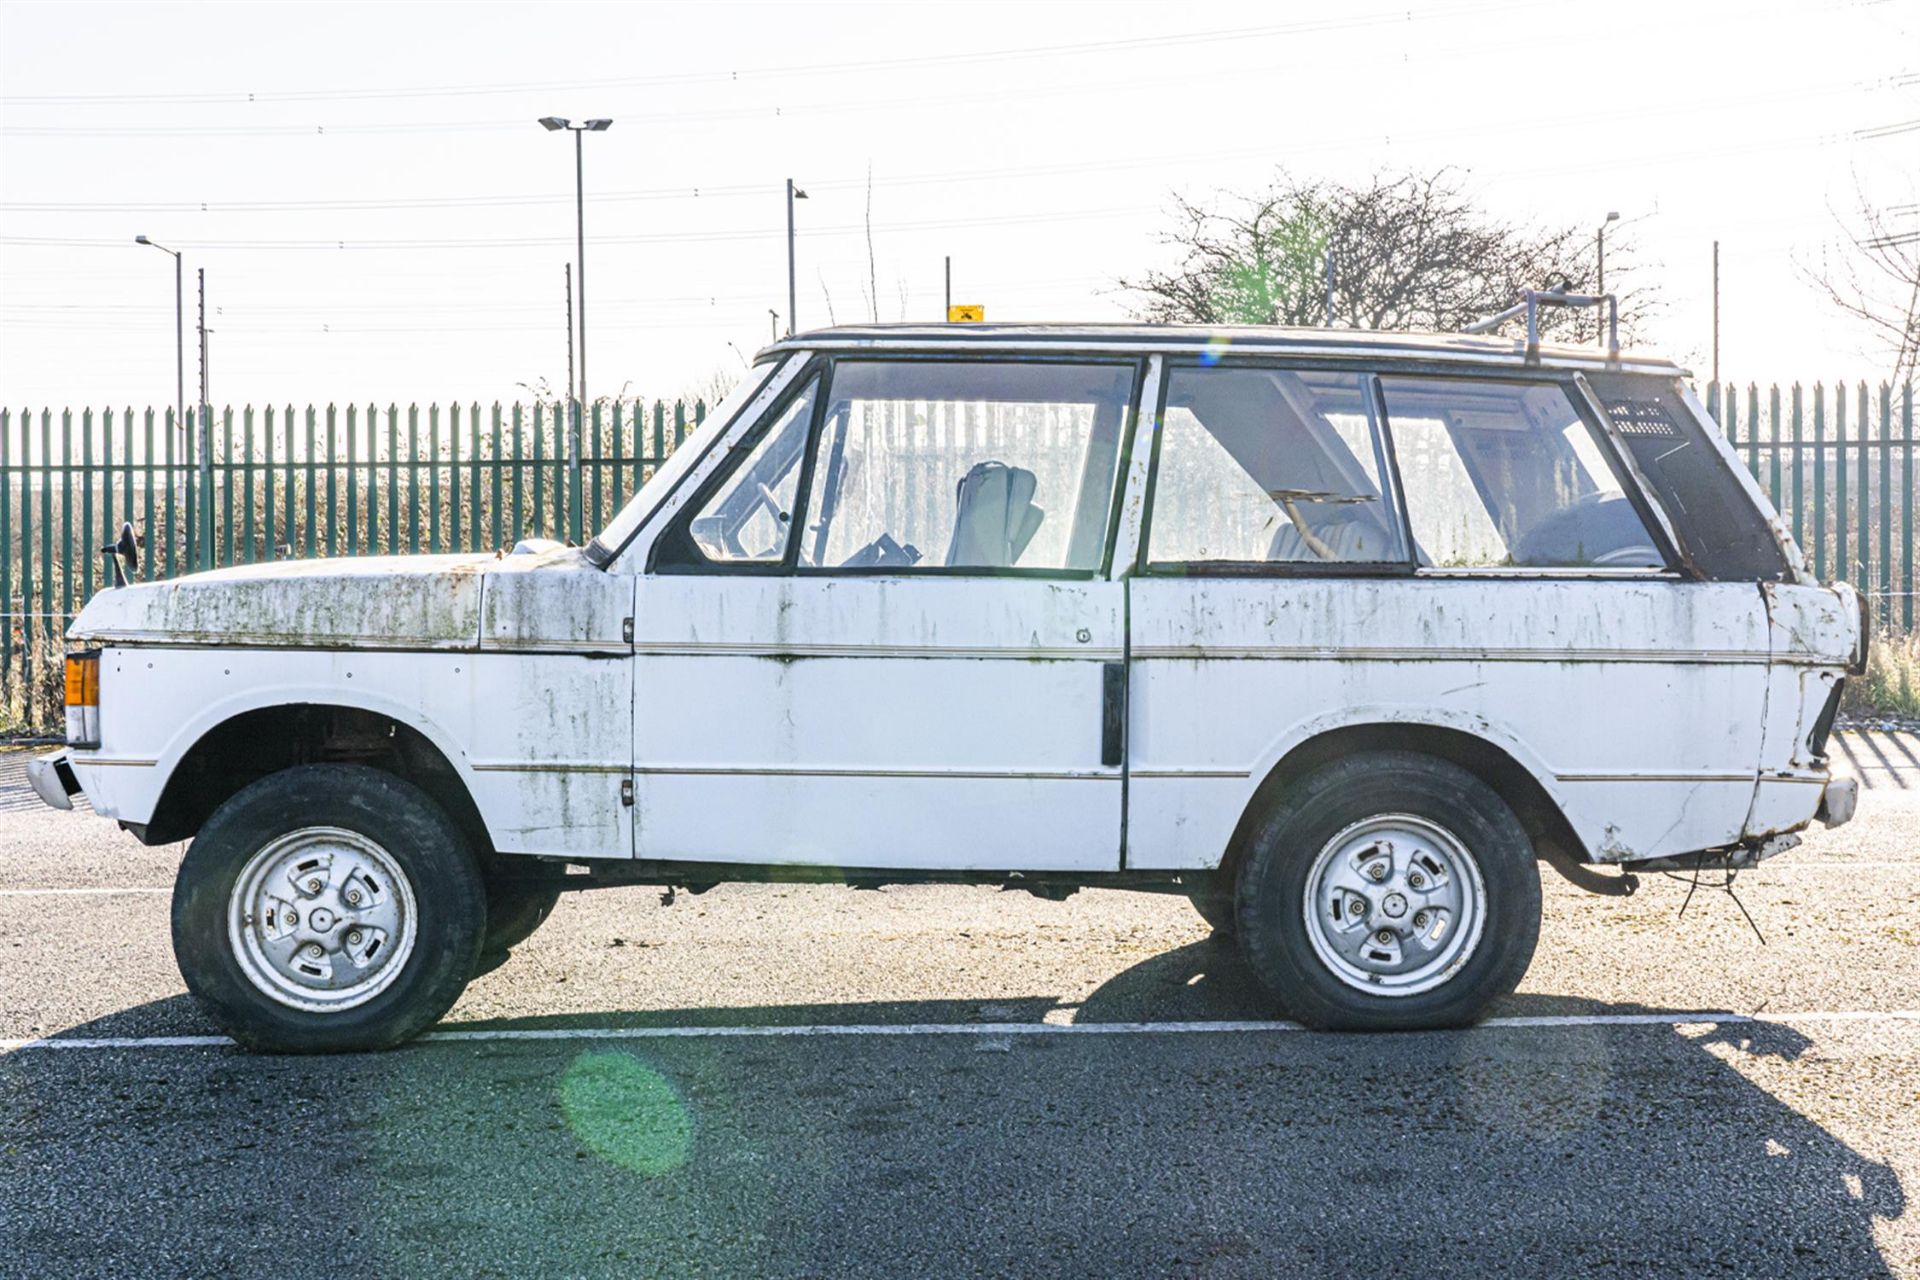 1971 Range Rover Classic 'Suffix A' - Image 3 of 5